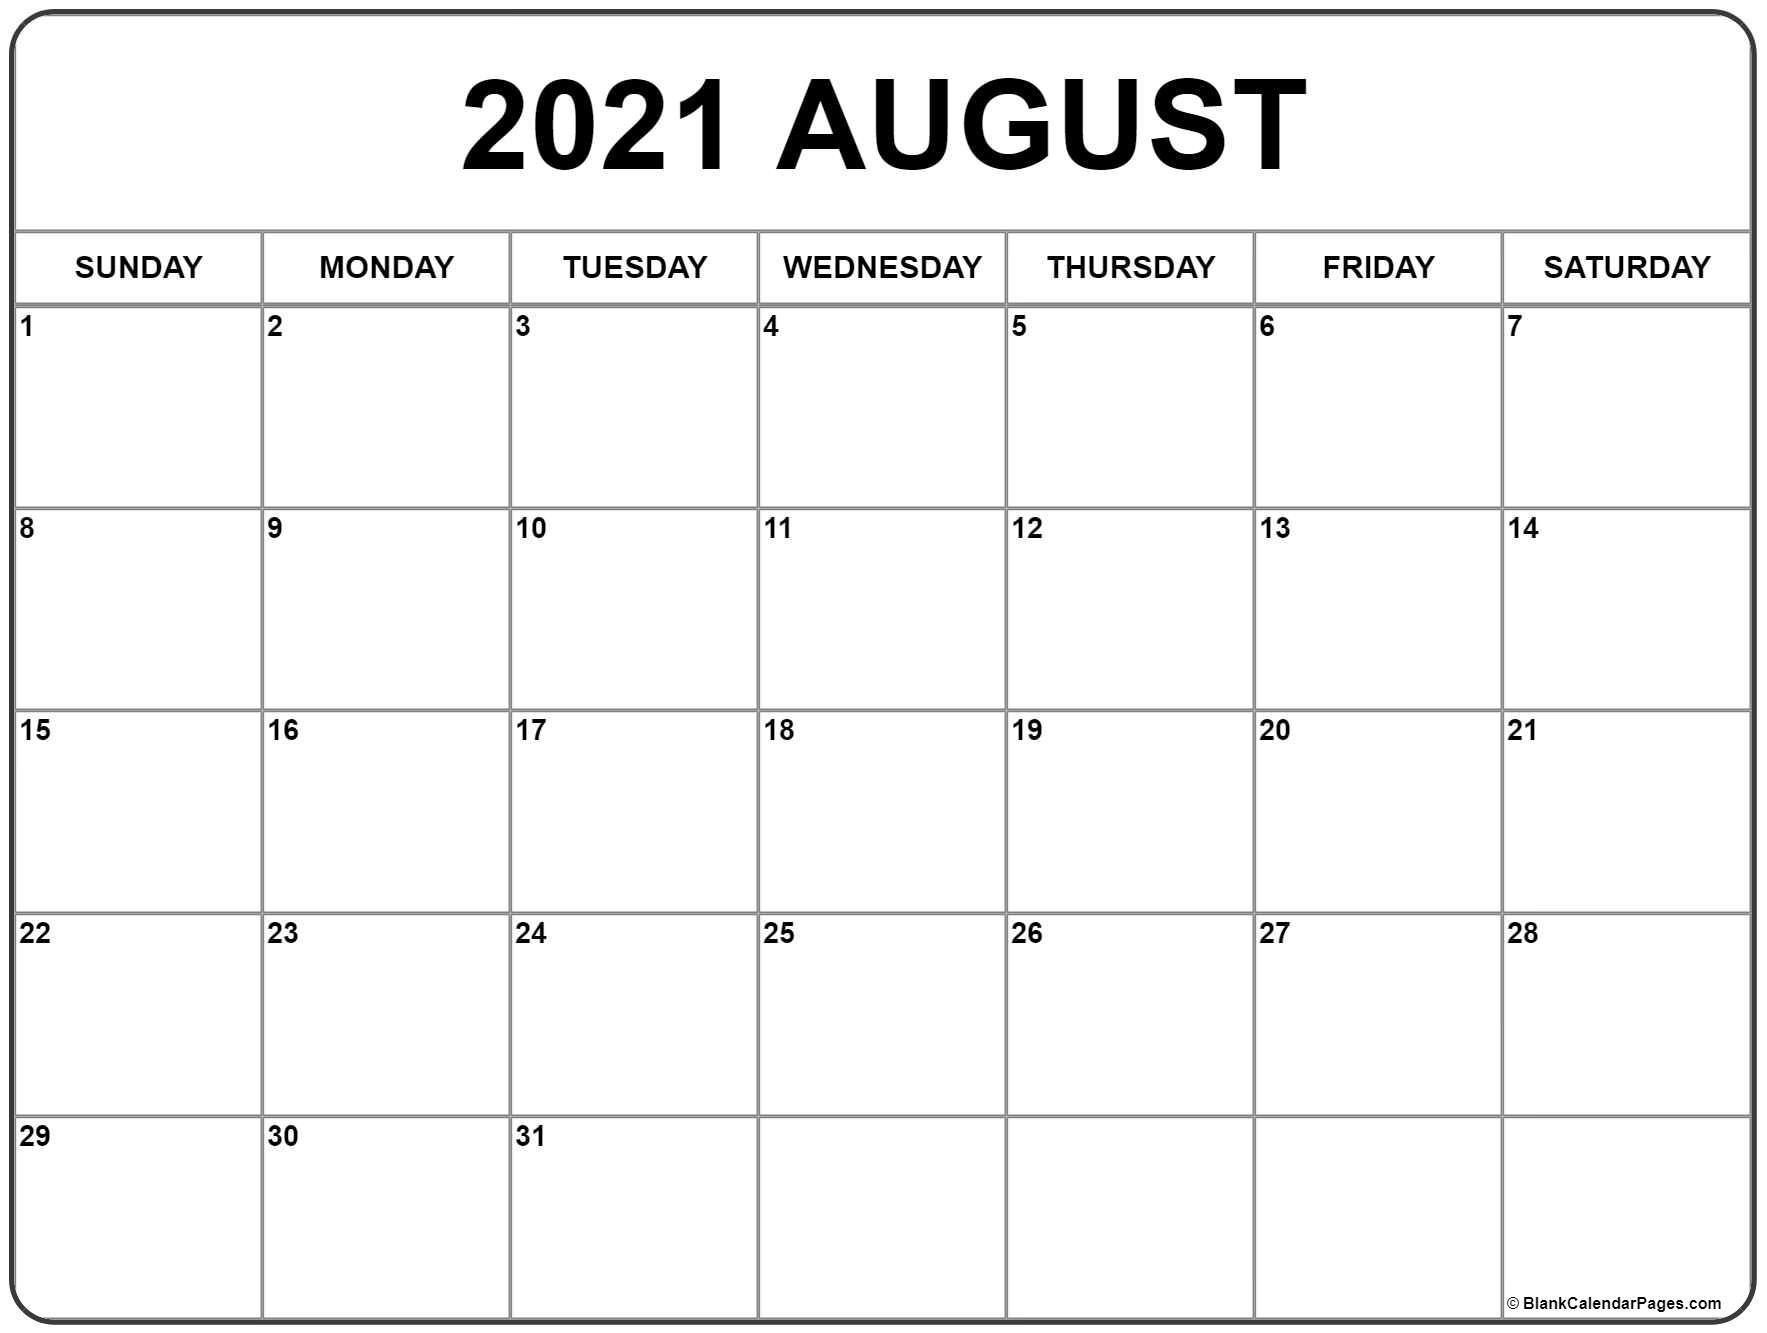 Take 2021 June Calendars To Print Without Downloading